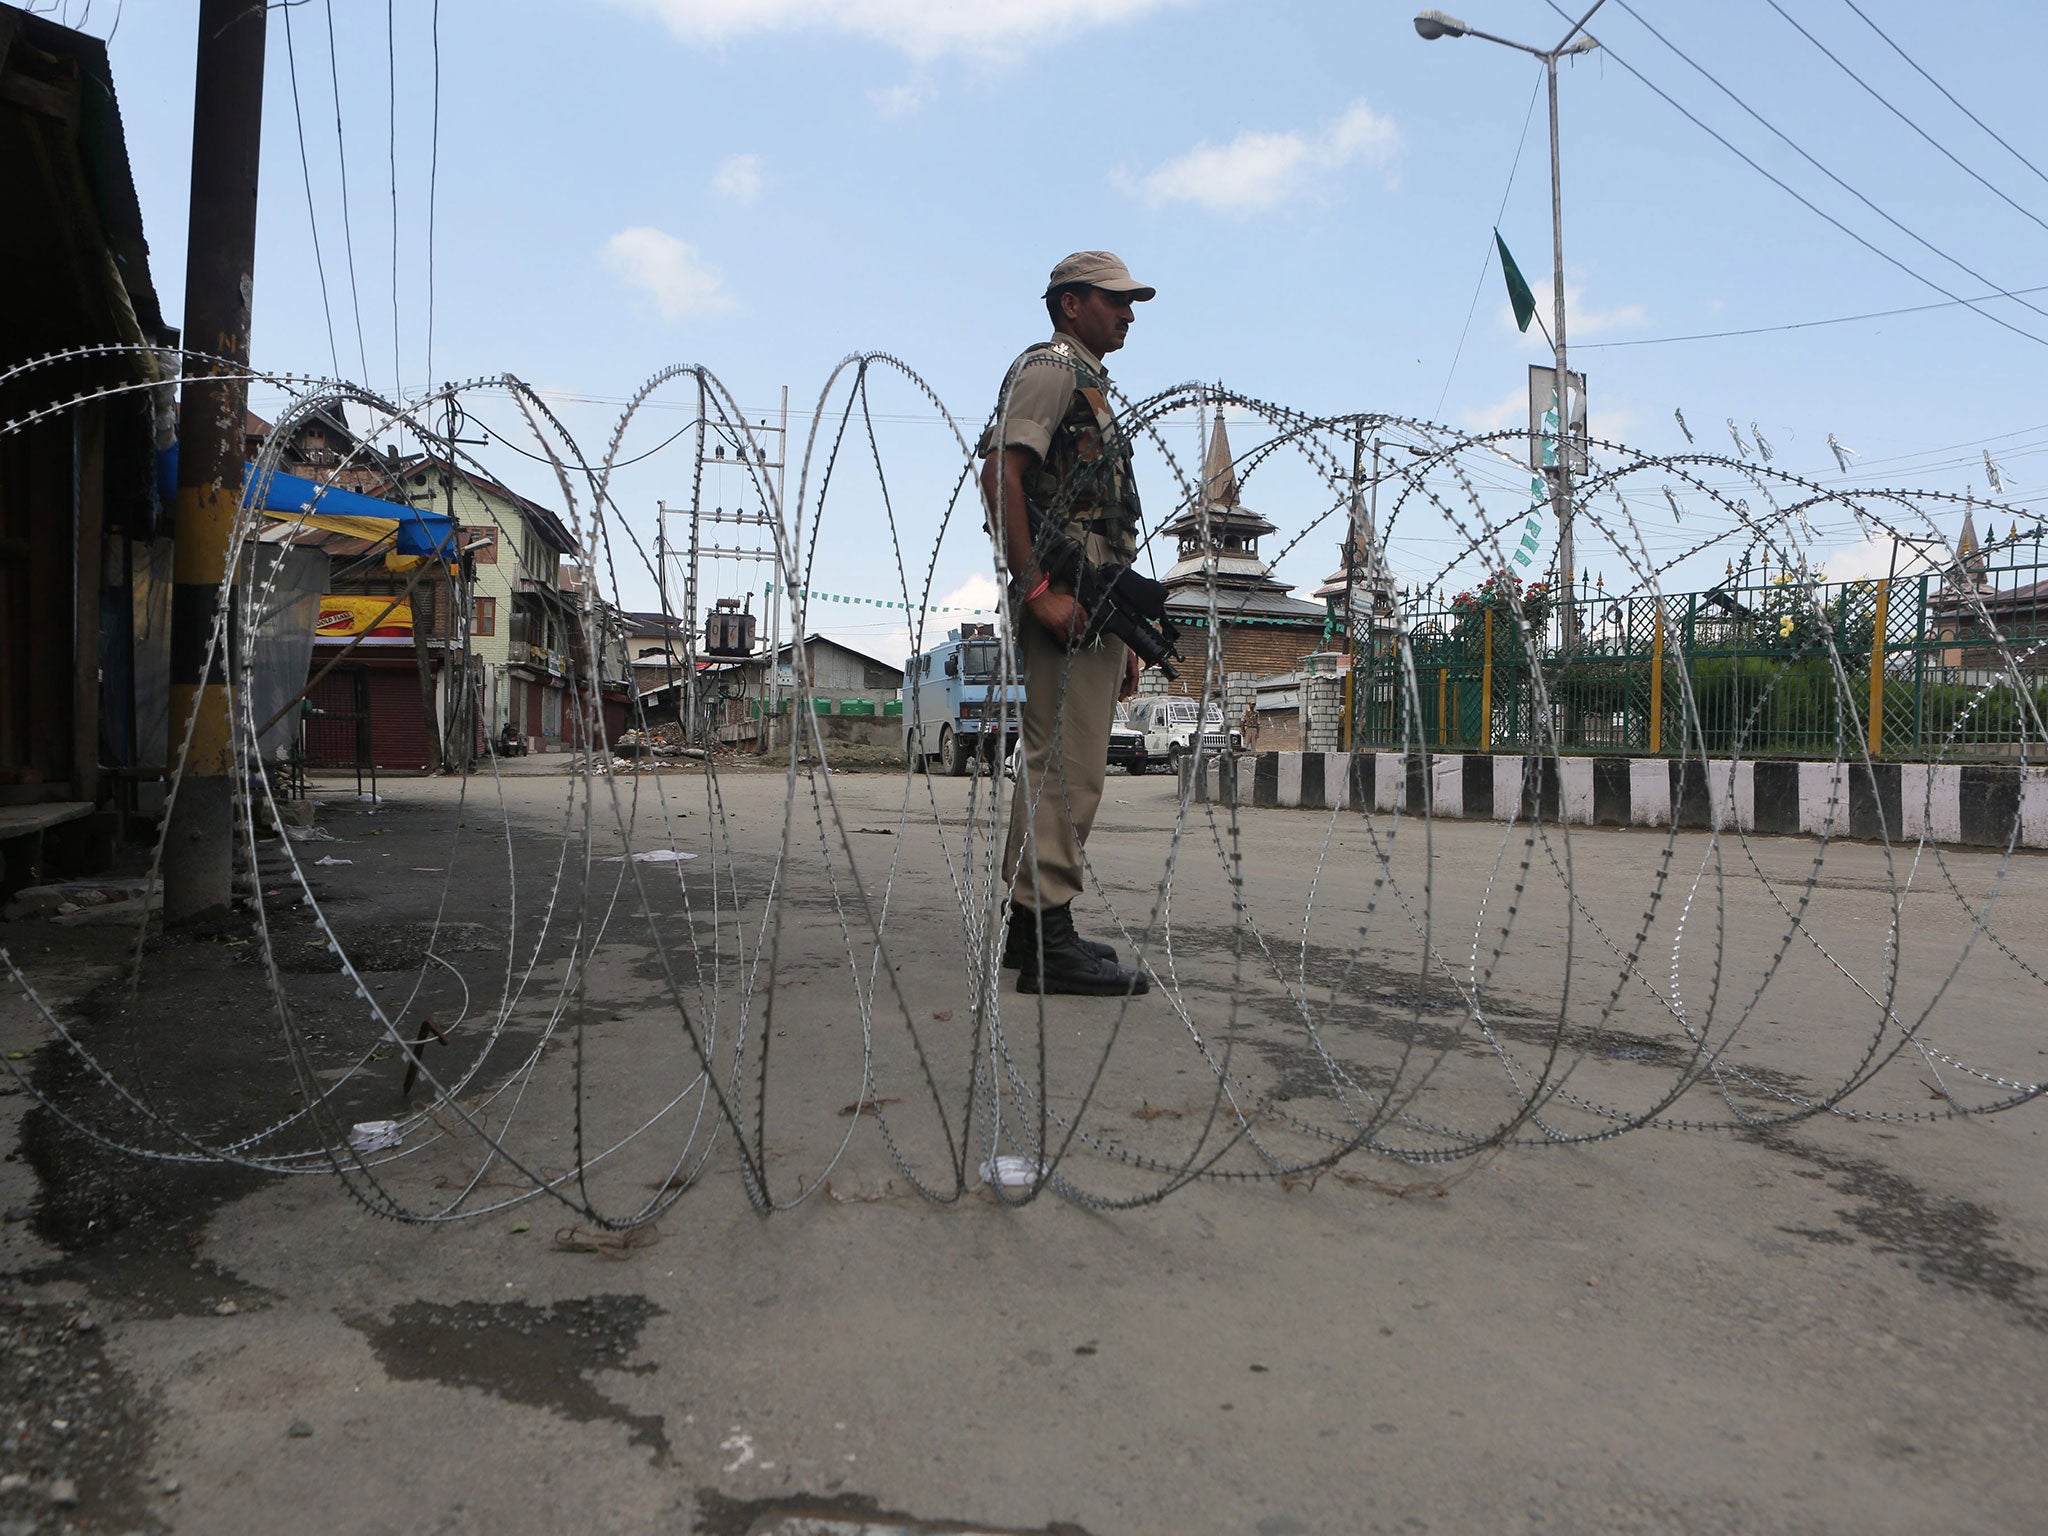 An Indian paramilitary soldier stands guard near barbed wire setup as barricade during restrictions in downtown area of Srinaga